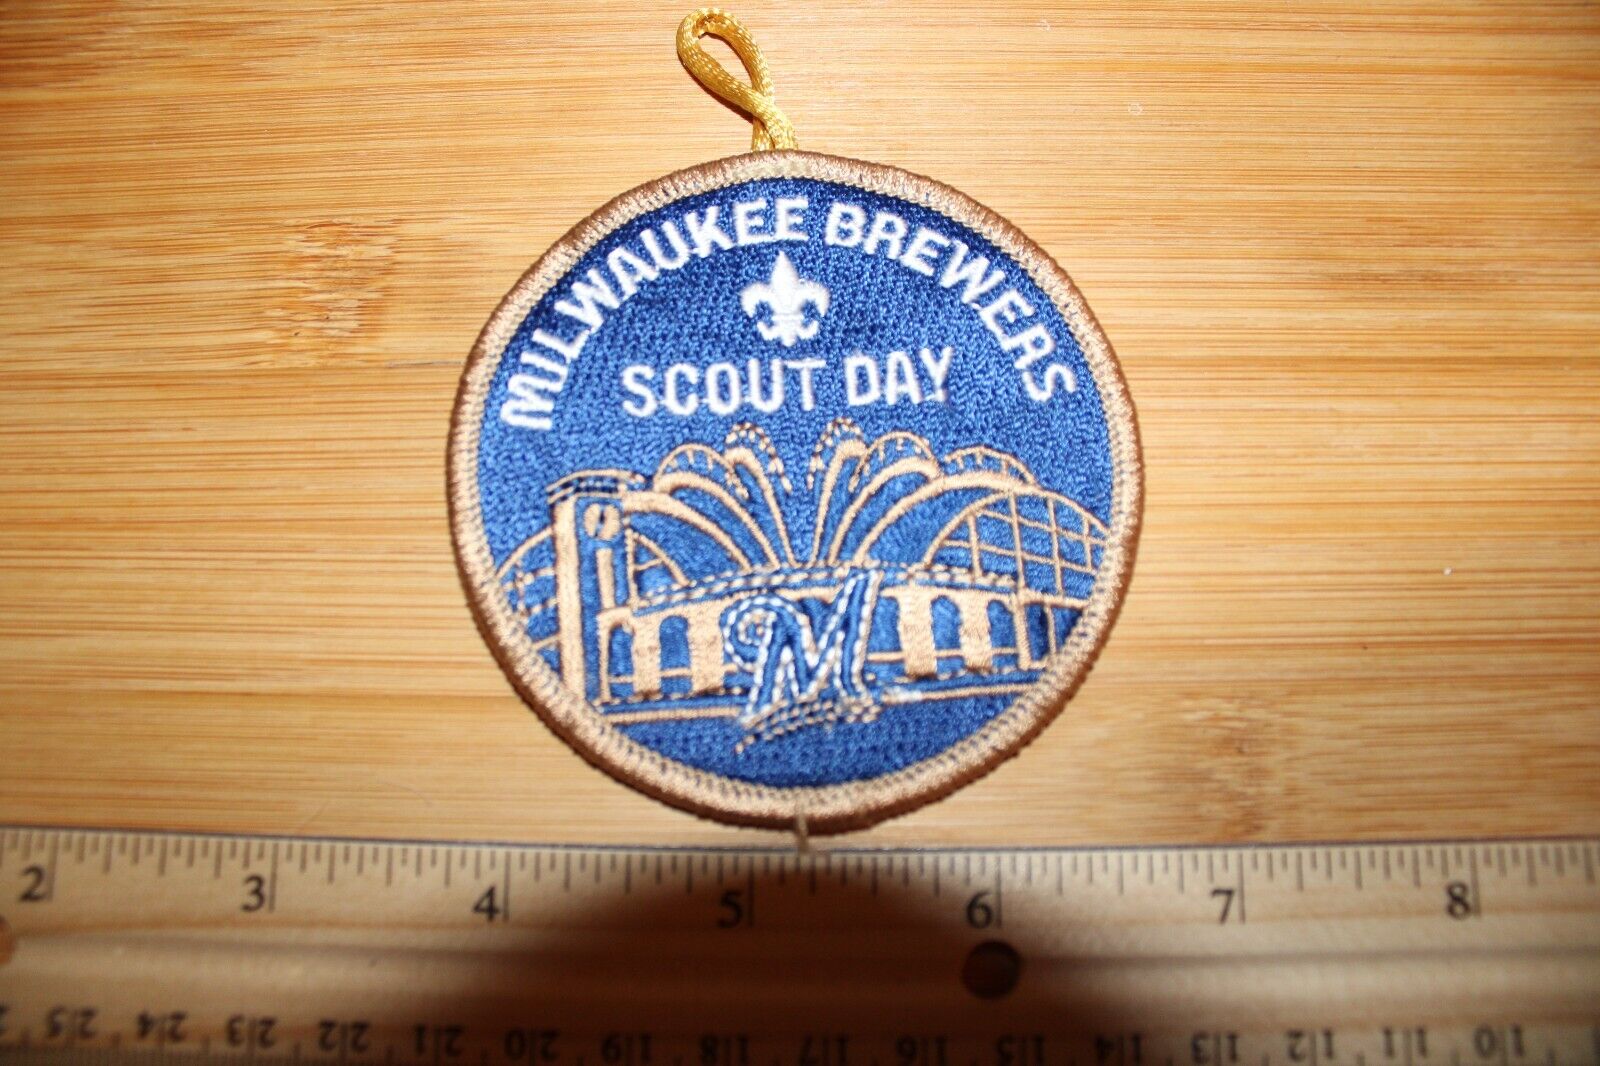 Milwaukee Brewers Scout Day Boy Scouts of America BSA Patch